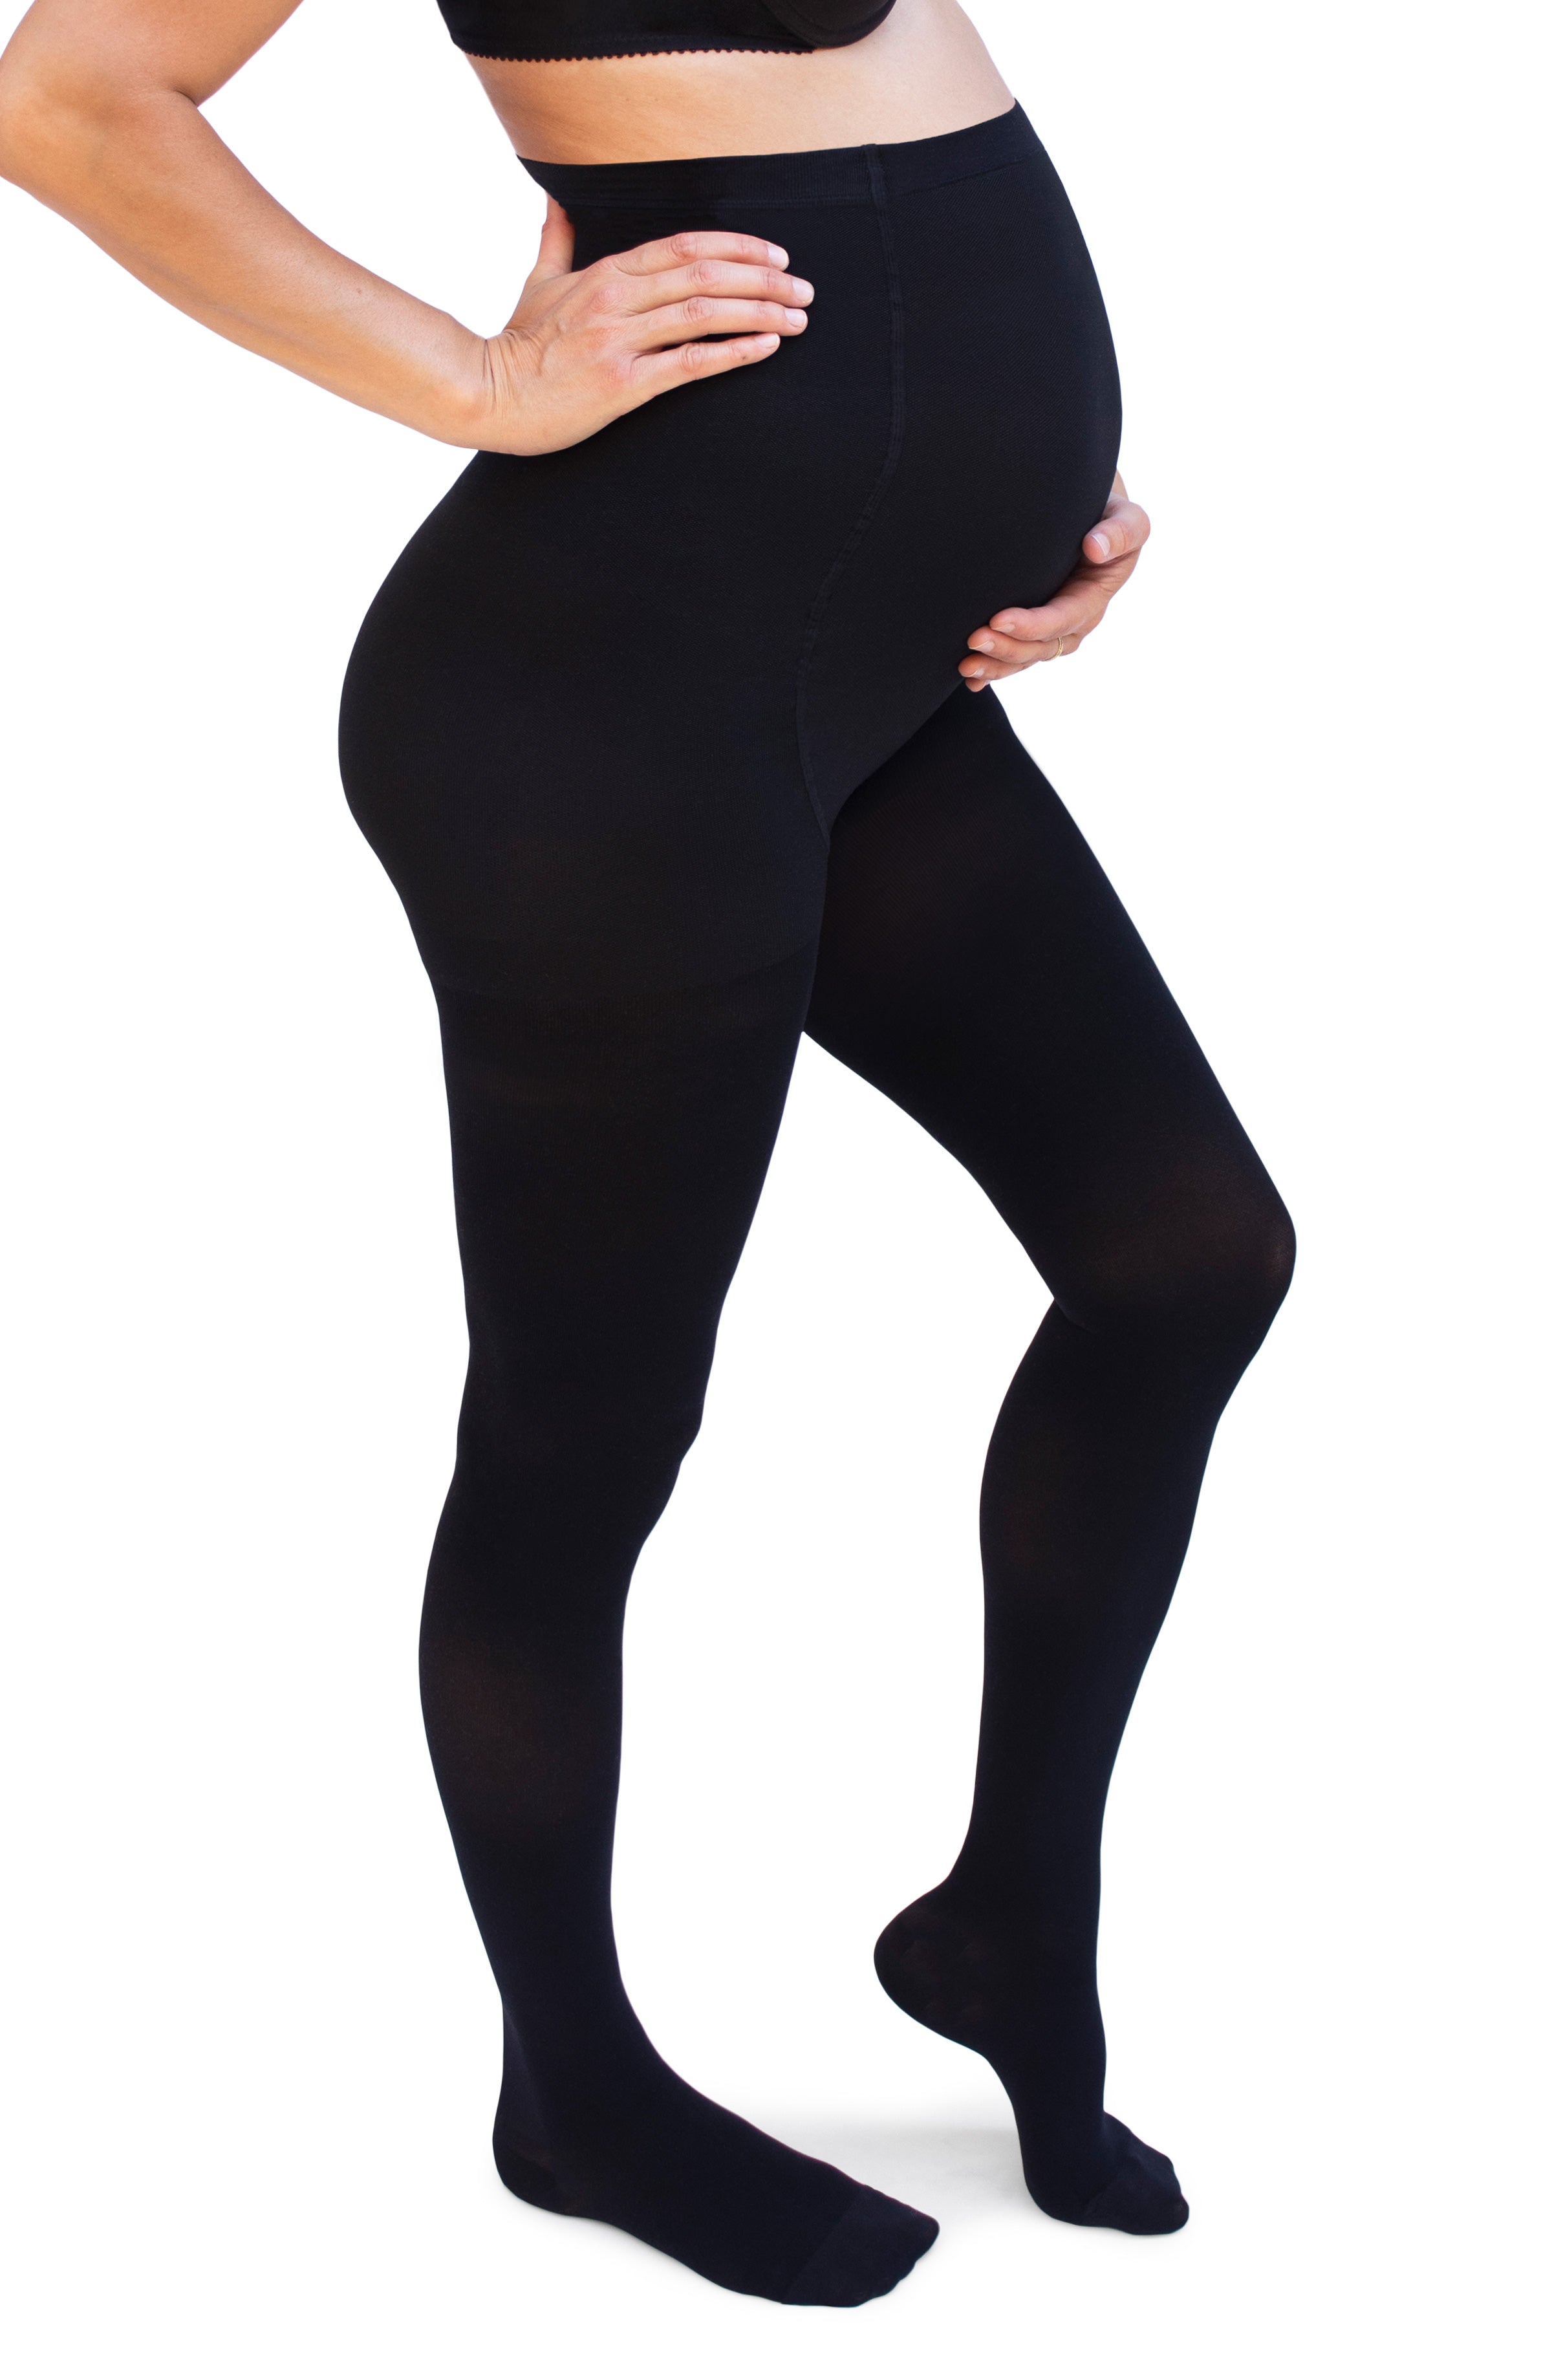 Huaheng Pregnant Women Tights Maternity Stockings Pantyhose Compression  Leggings Nude : Amazon.in: Clothing & Accessories